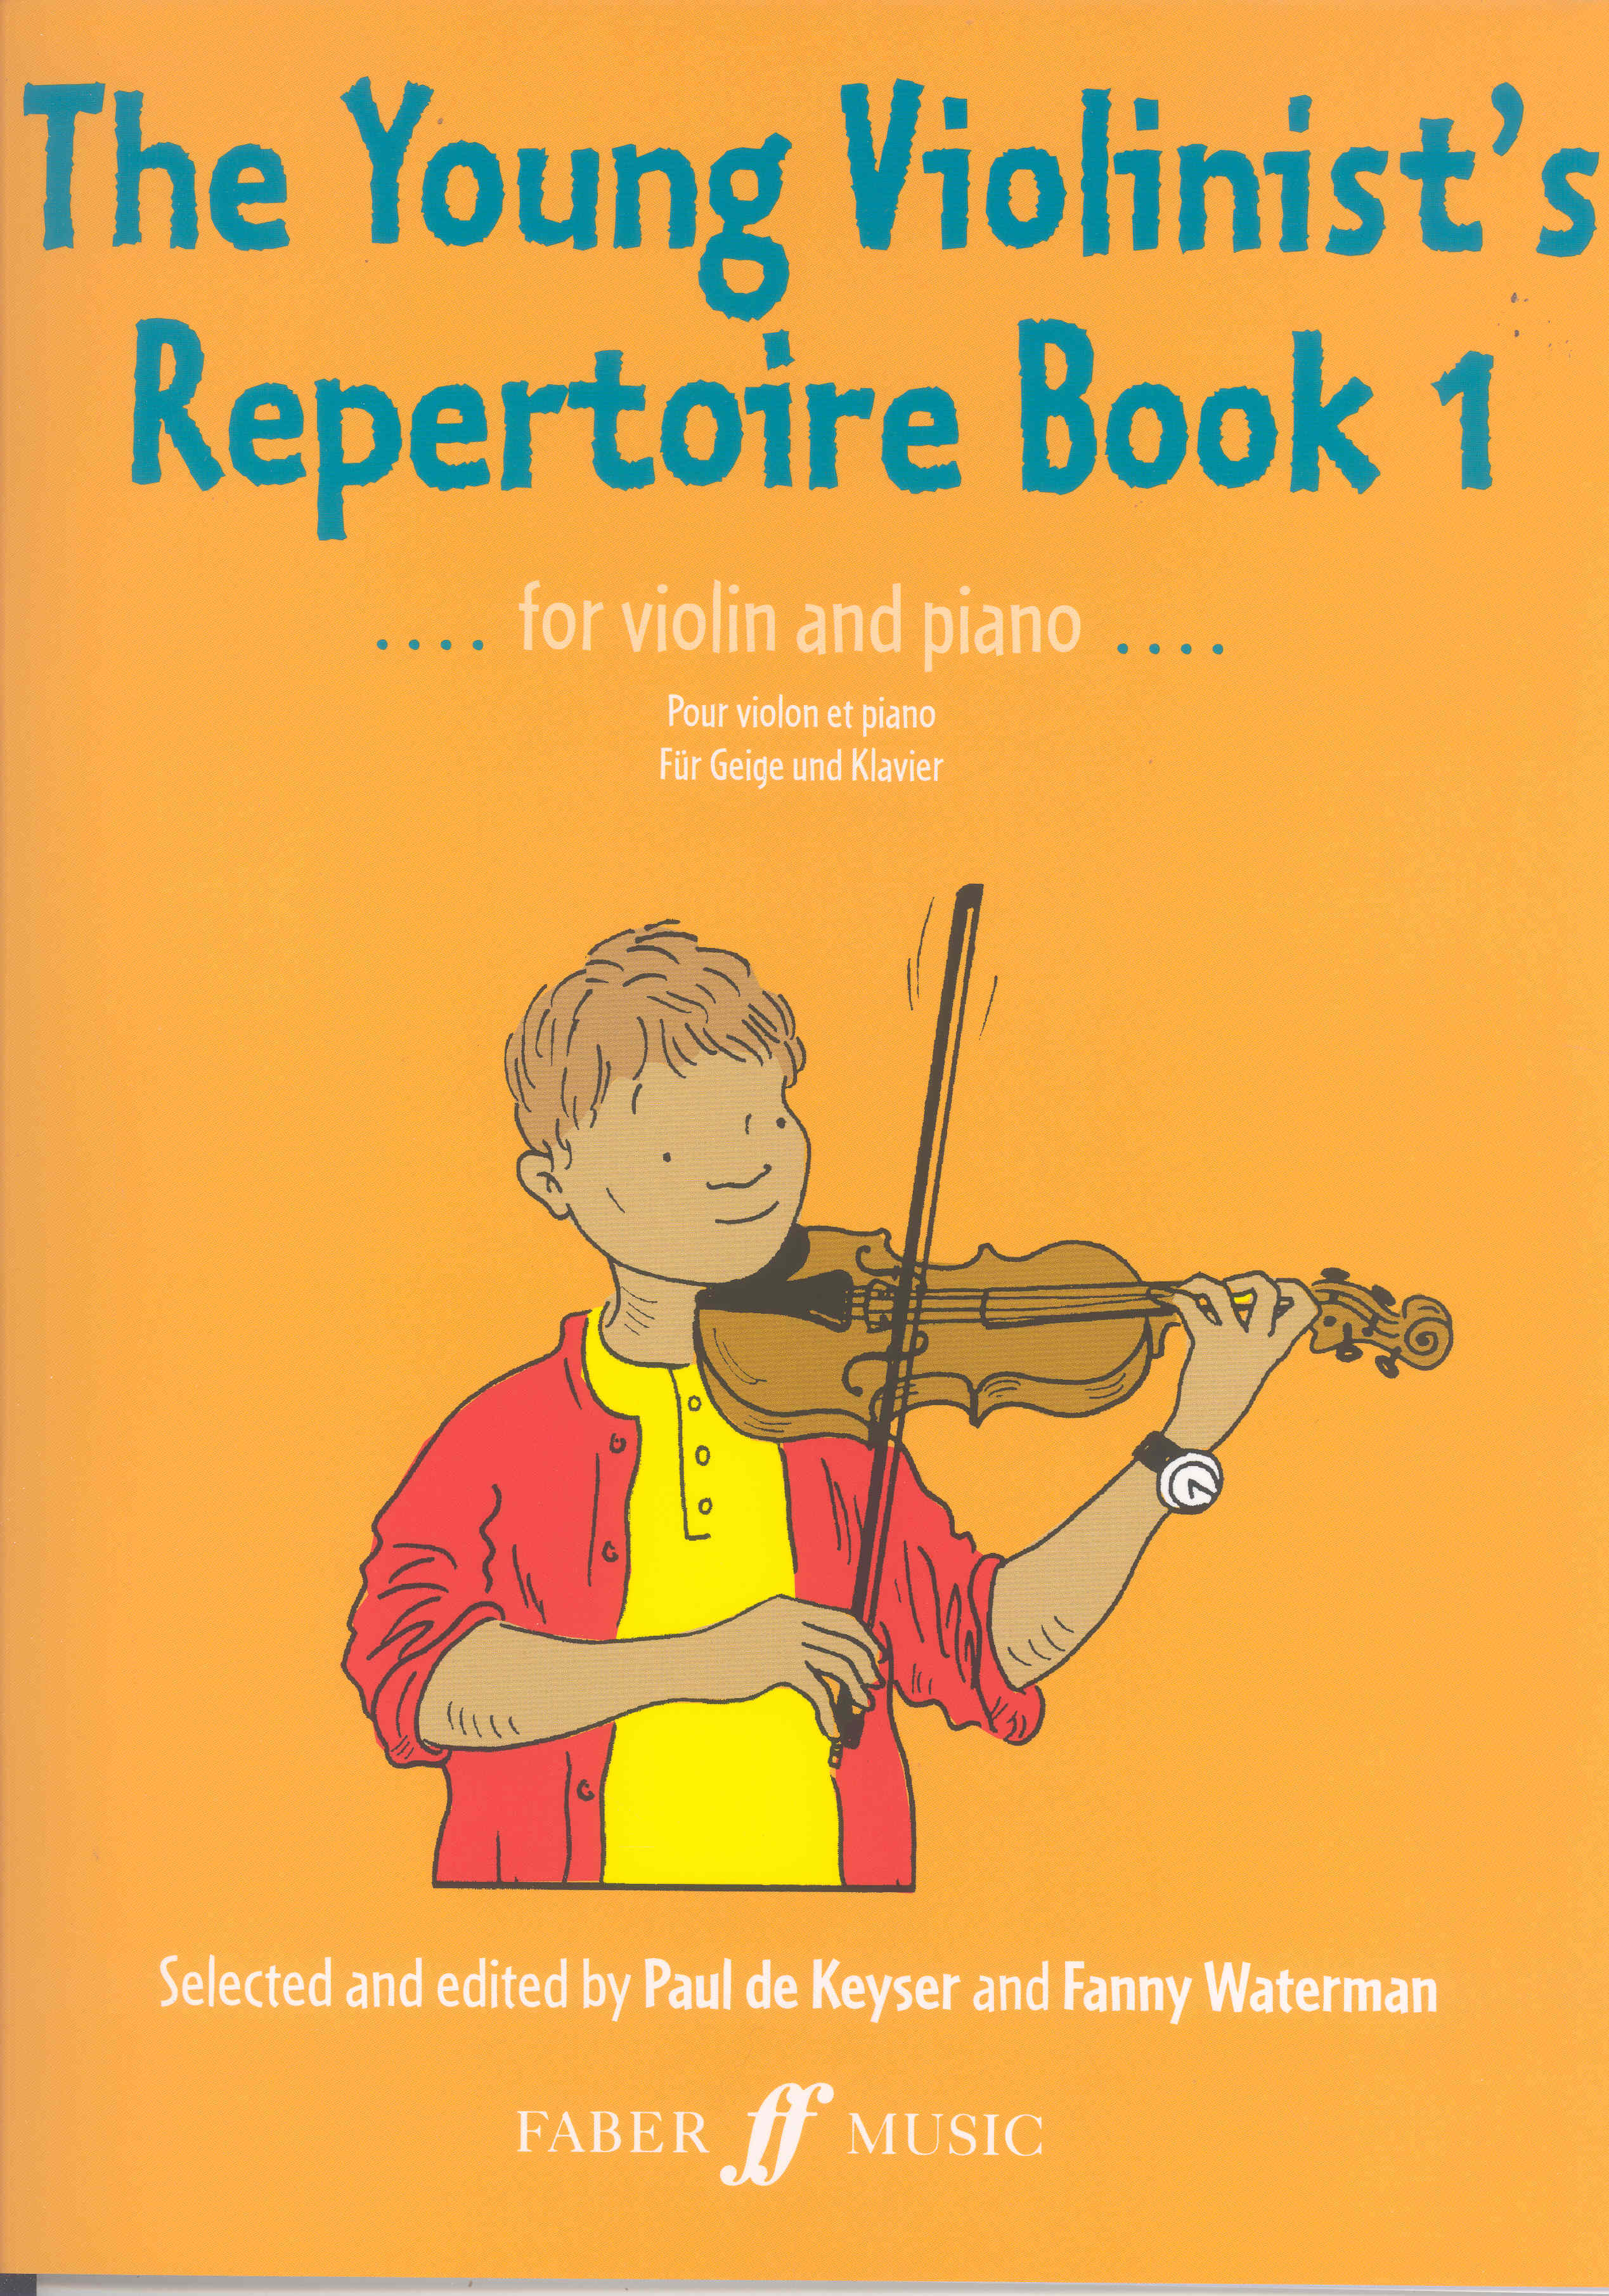 Young Violinists Repertoire Book 1 Violin & Piano Sheet Music Songbook